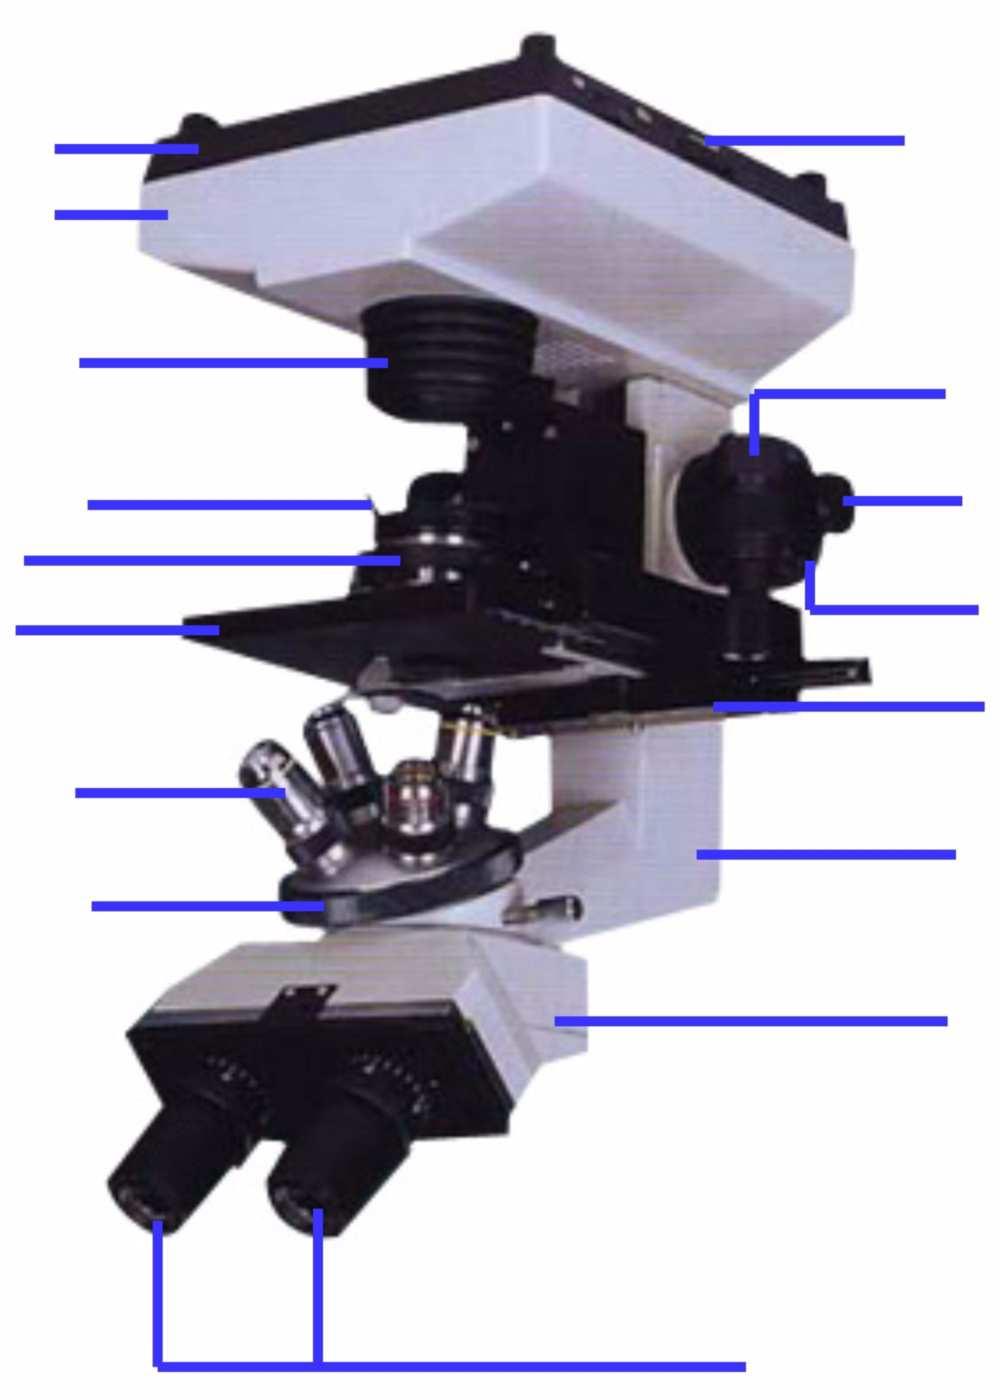 The Microscope Label the parts of